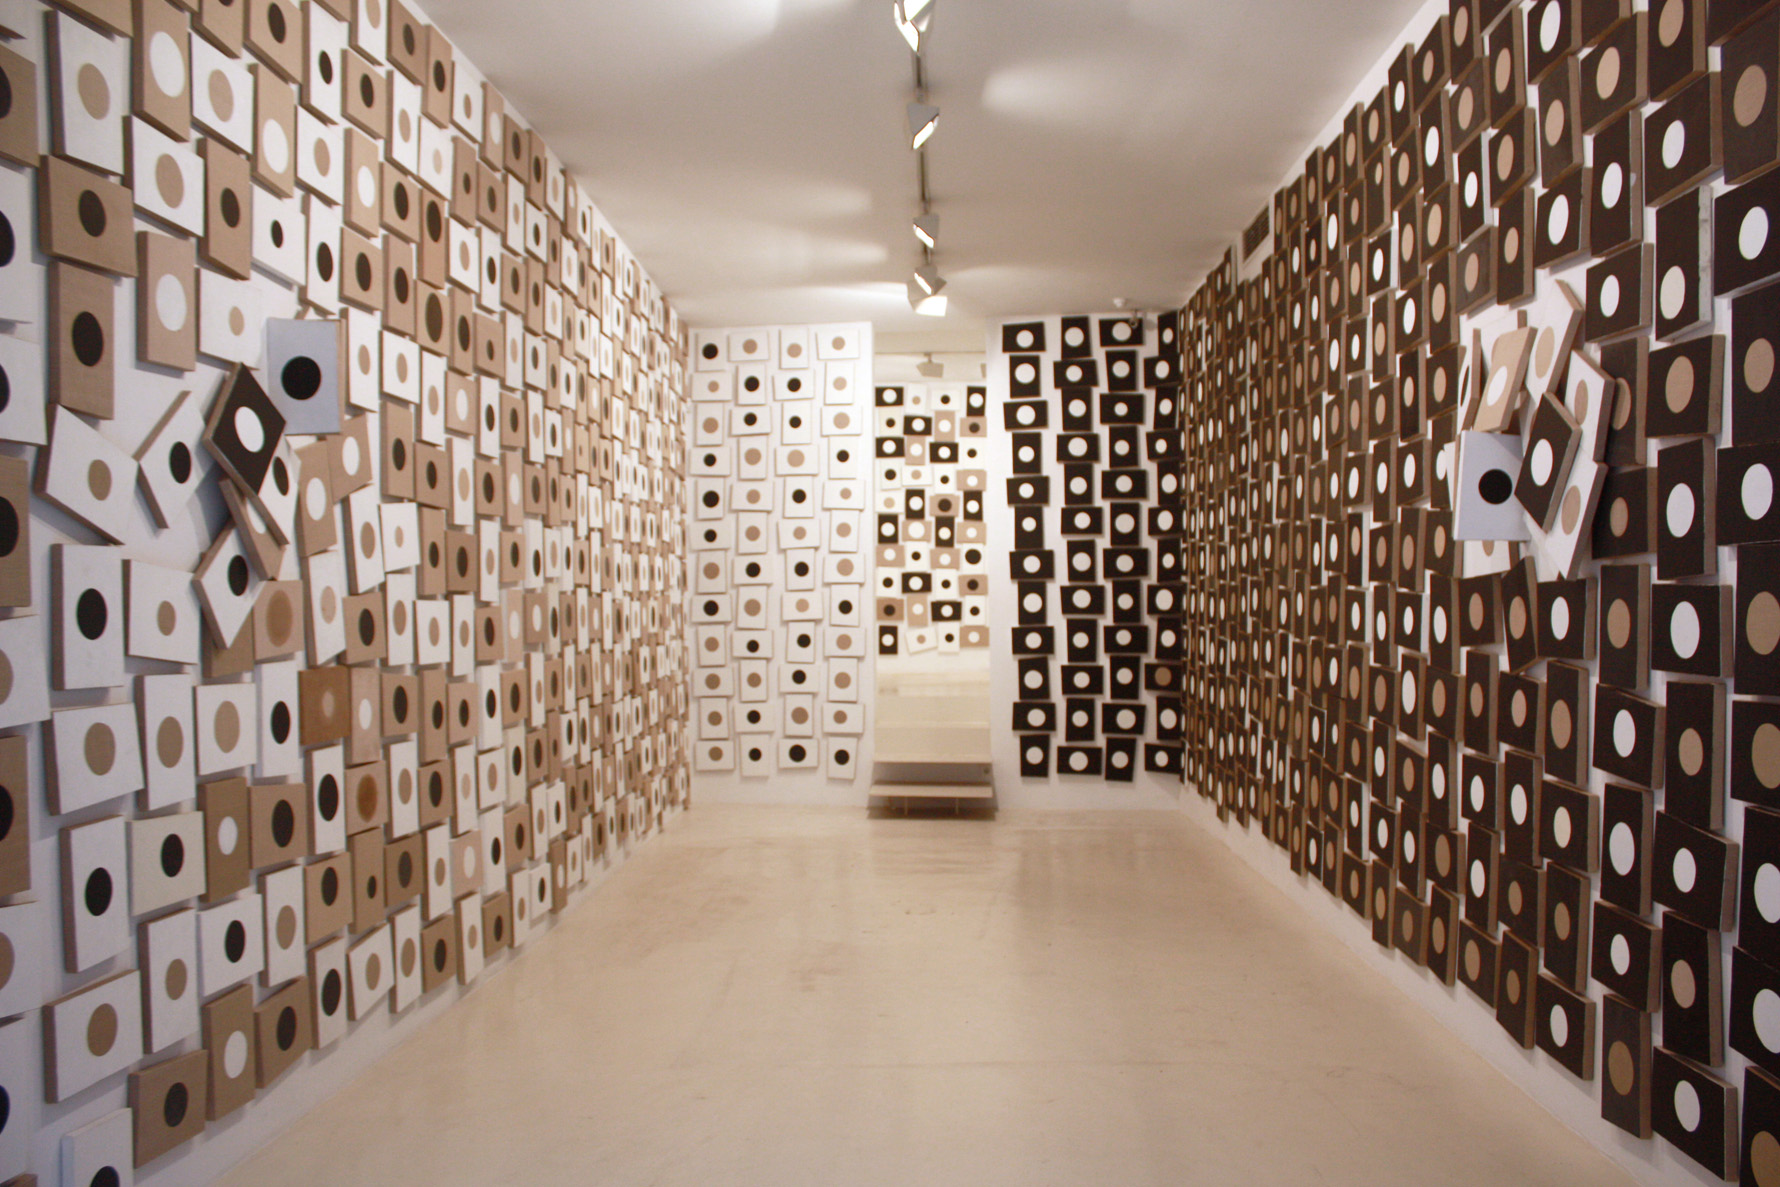 Exhibition view in the Galería Maior of Palma, 2014